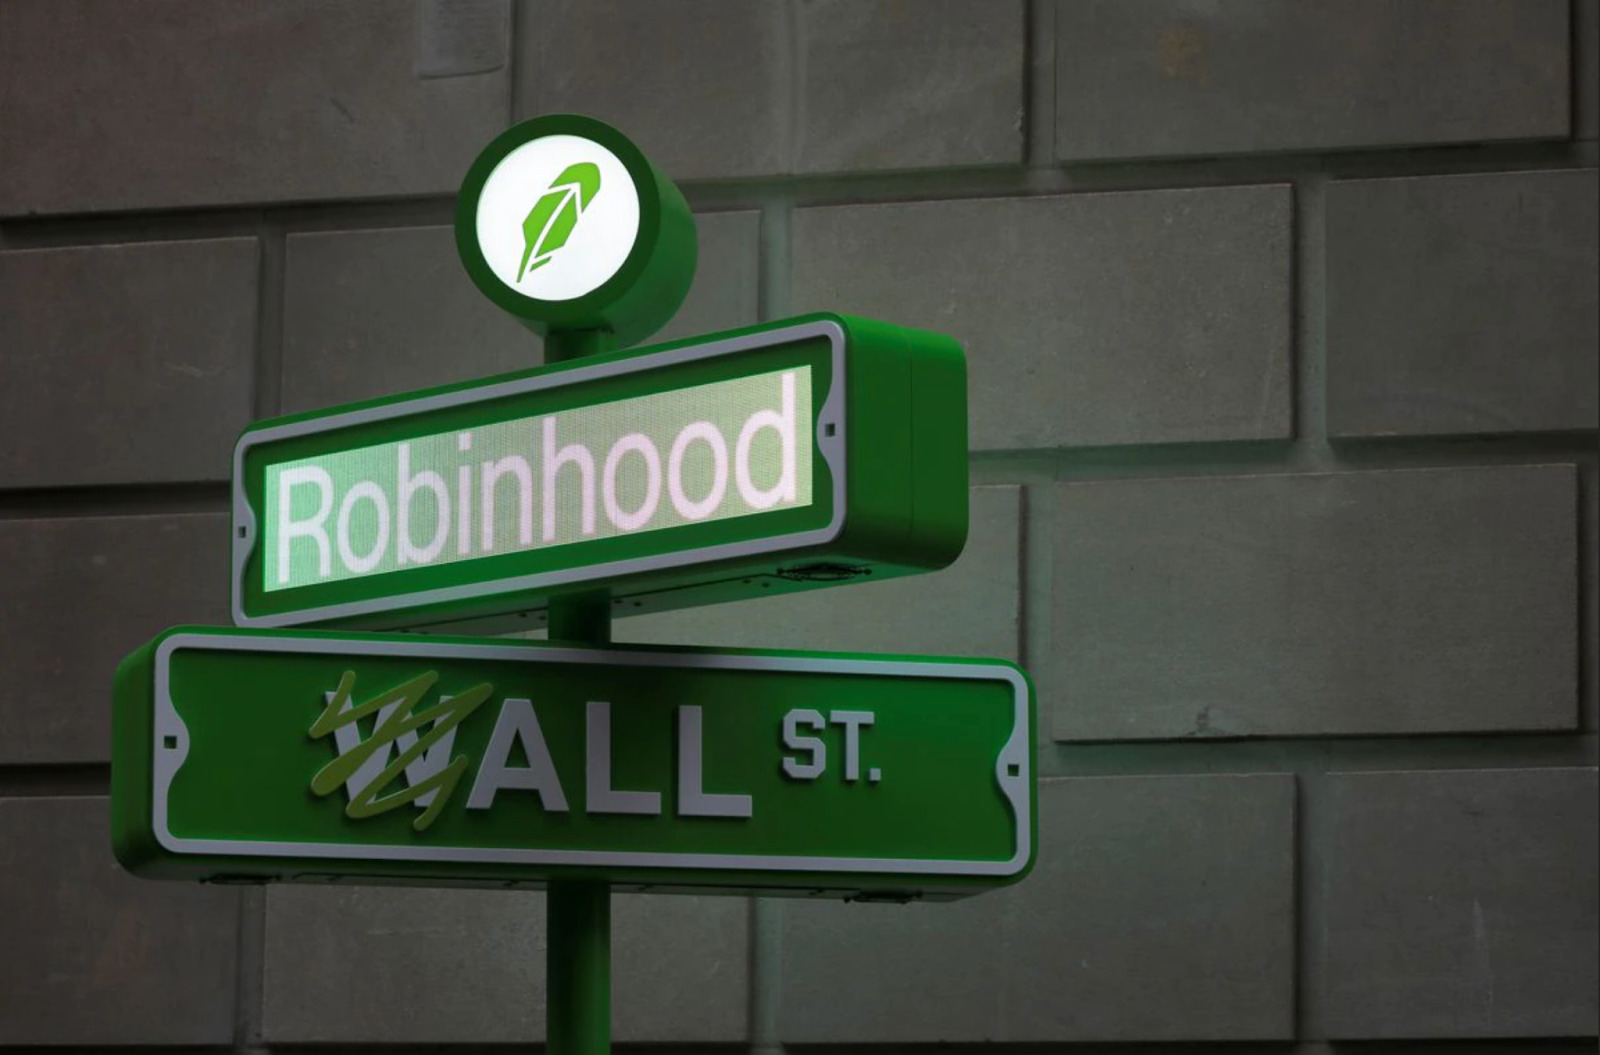 Robinhood, an example of a meaningful brand name